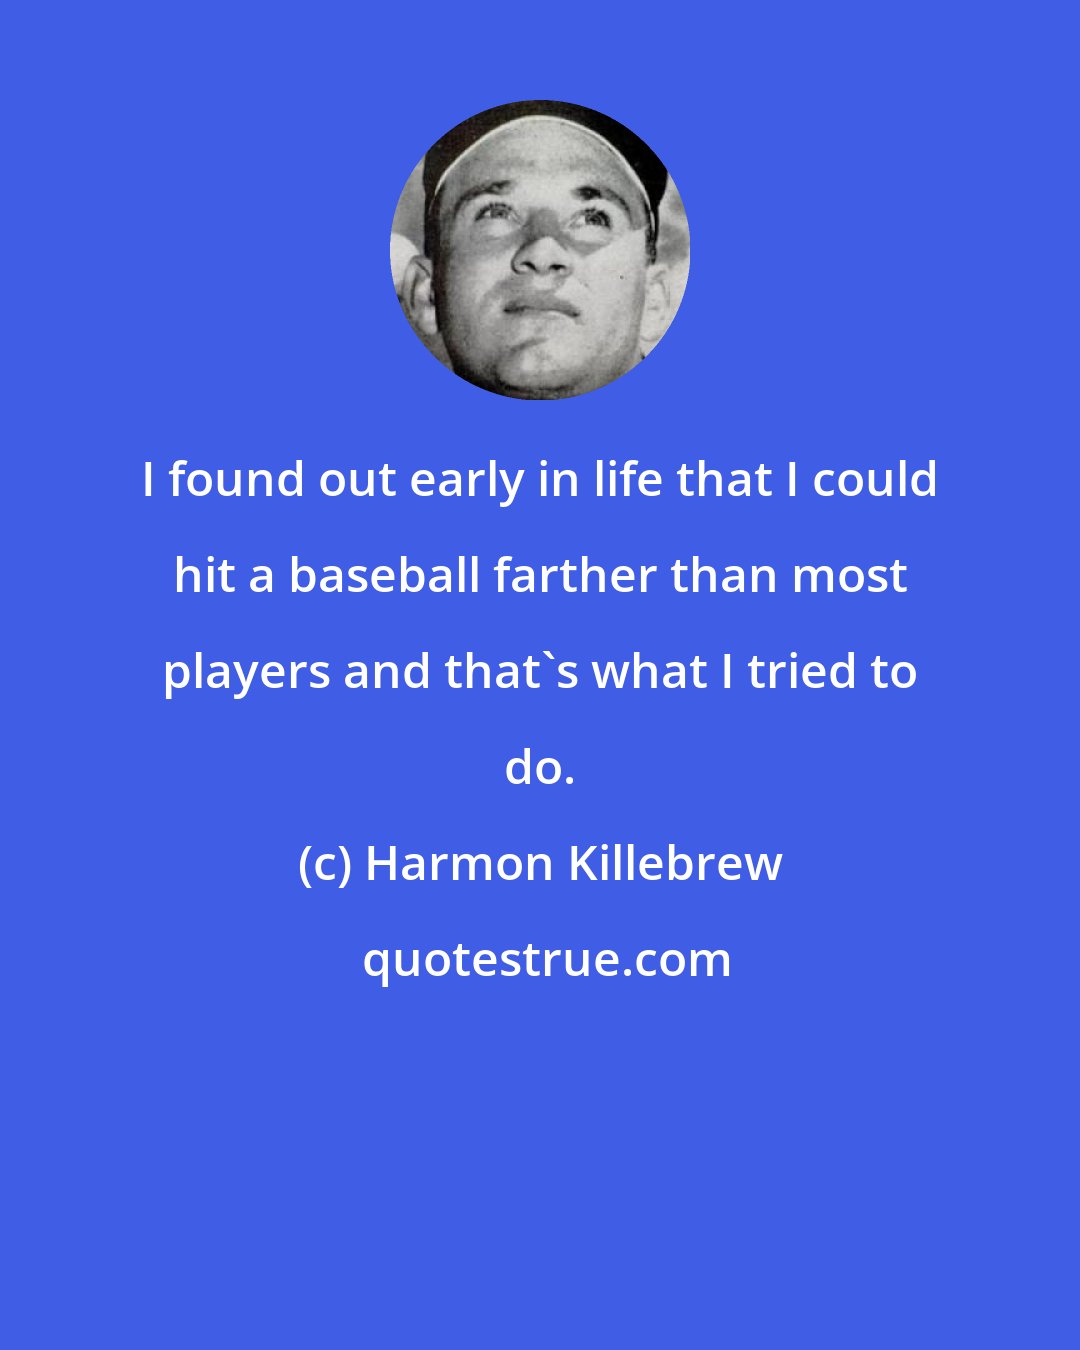 Harmon Killebrew: I found out early in life that I could hit a baseball farther than most players and that's what I tried to do.